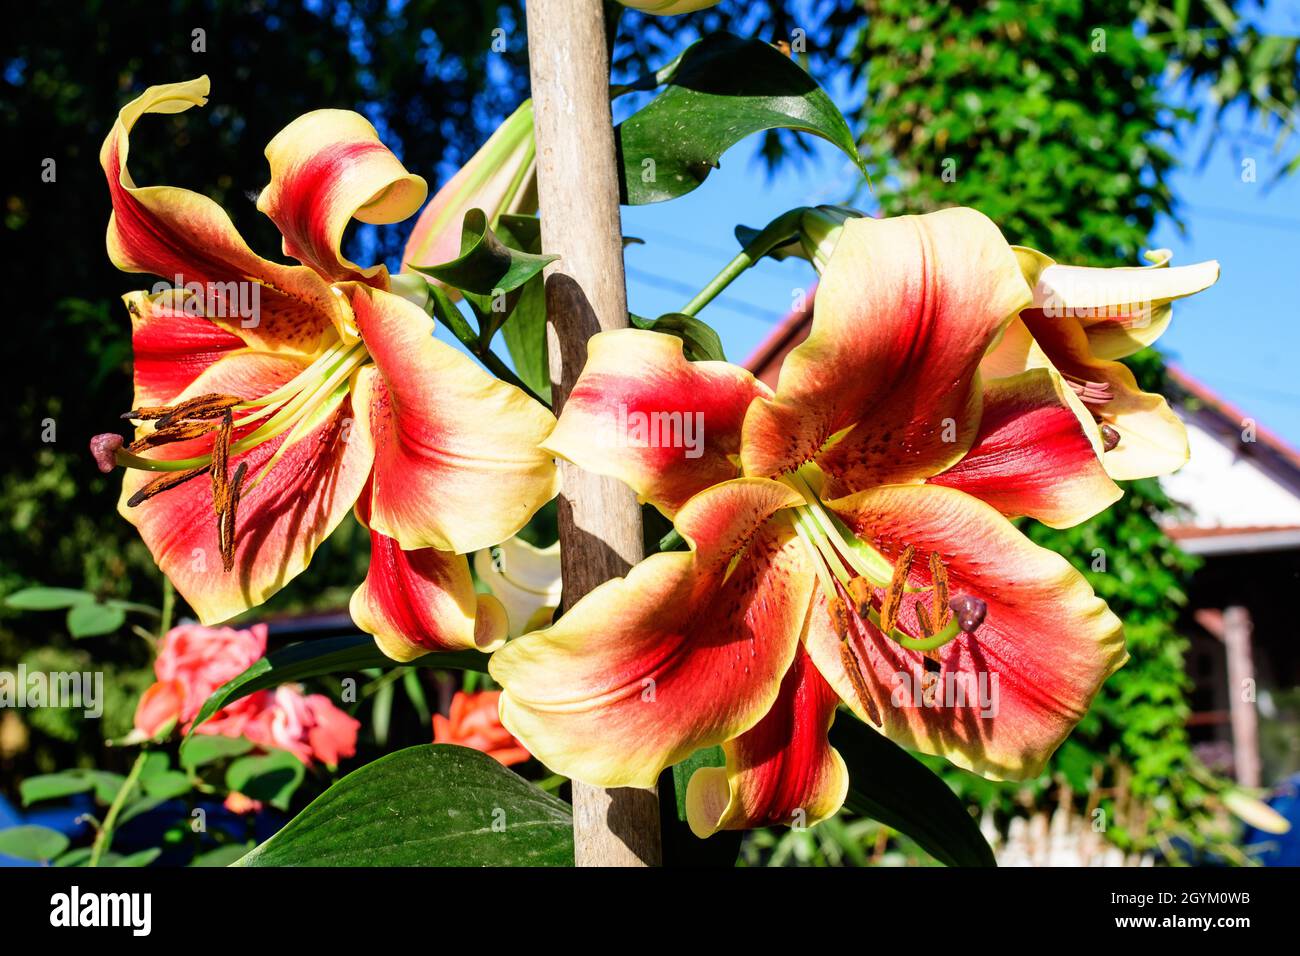 Two large red and yellow flowers of Lilium or Lily plant in a British cottage style garden in a sunny summer day, beautiful outdoor floral background Stock Photo